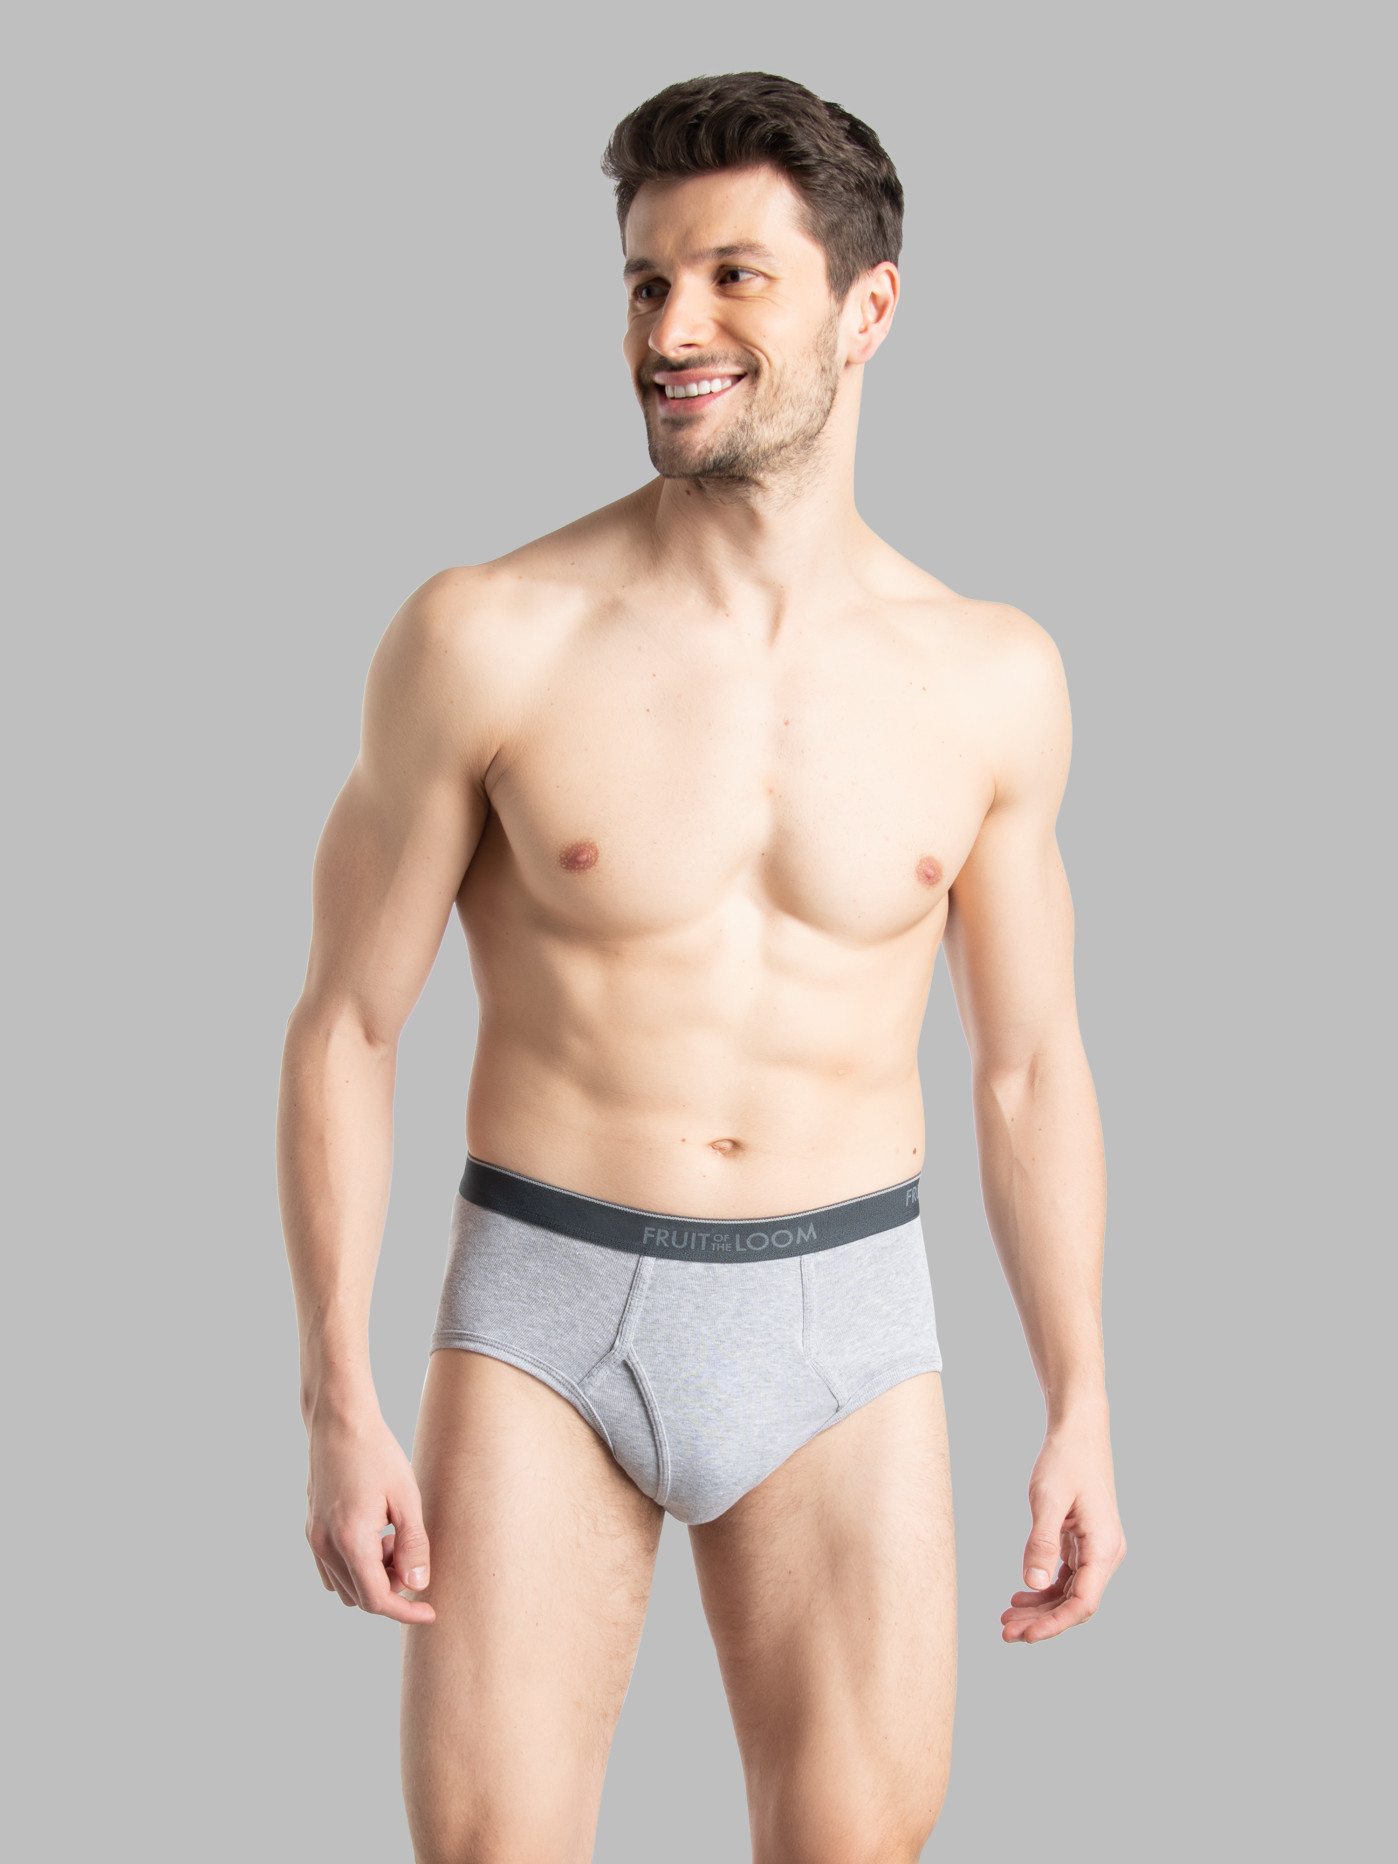 Fruit of the Loom Mens Fashion Briefs, 6 Pack, Sizes Palestine